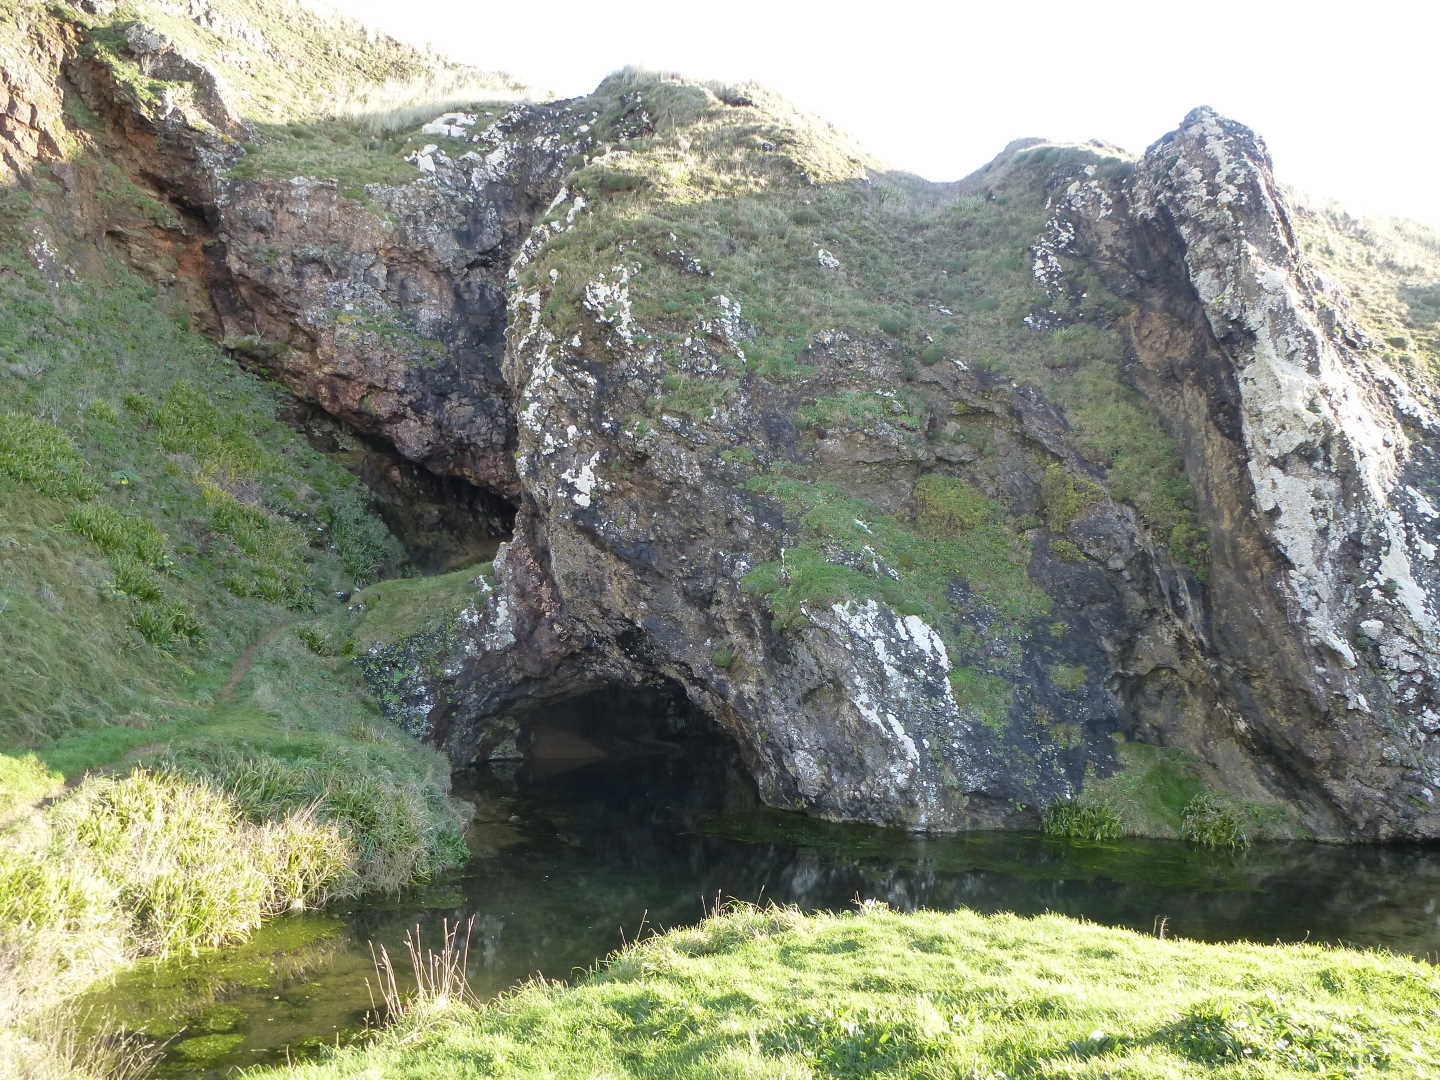 A view of the tide halfway up a sunken cave in a cliff